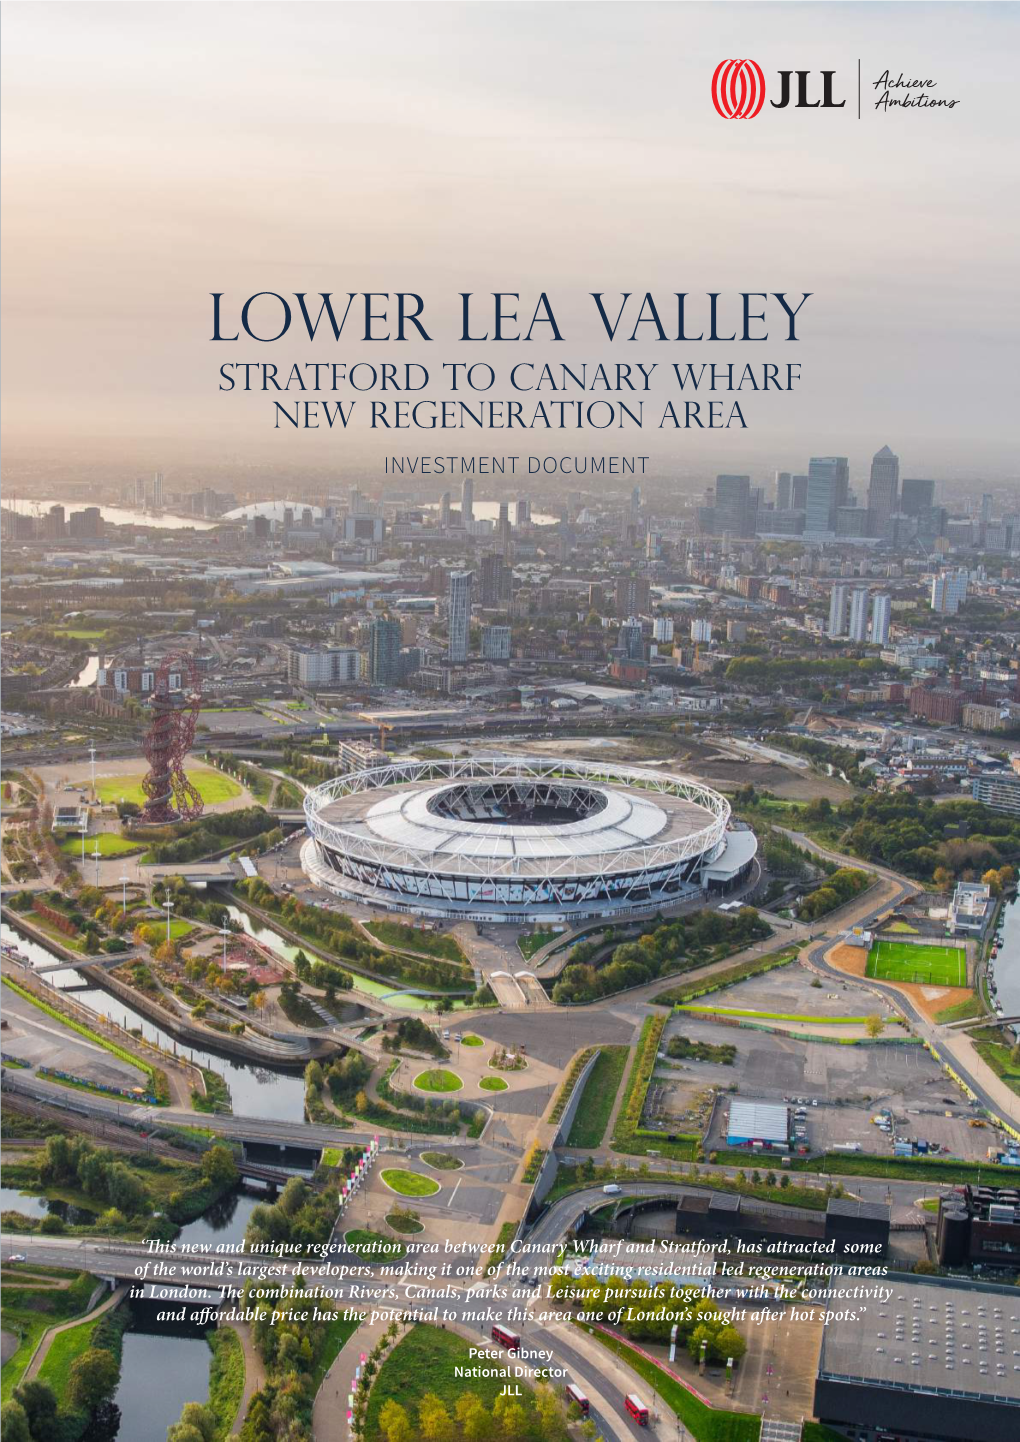 Lower Lea Valley Stratford to Canary Wharf New Regeneration Area INVESTMENT DOCUMENT